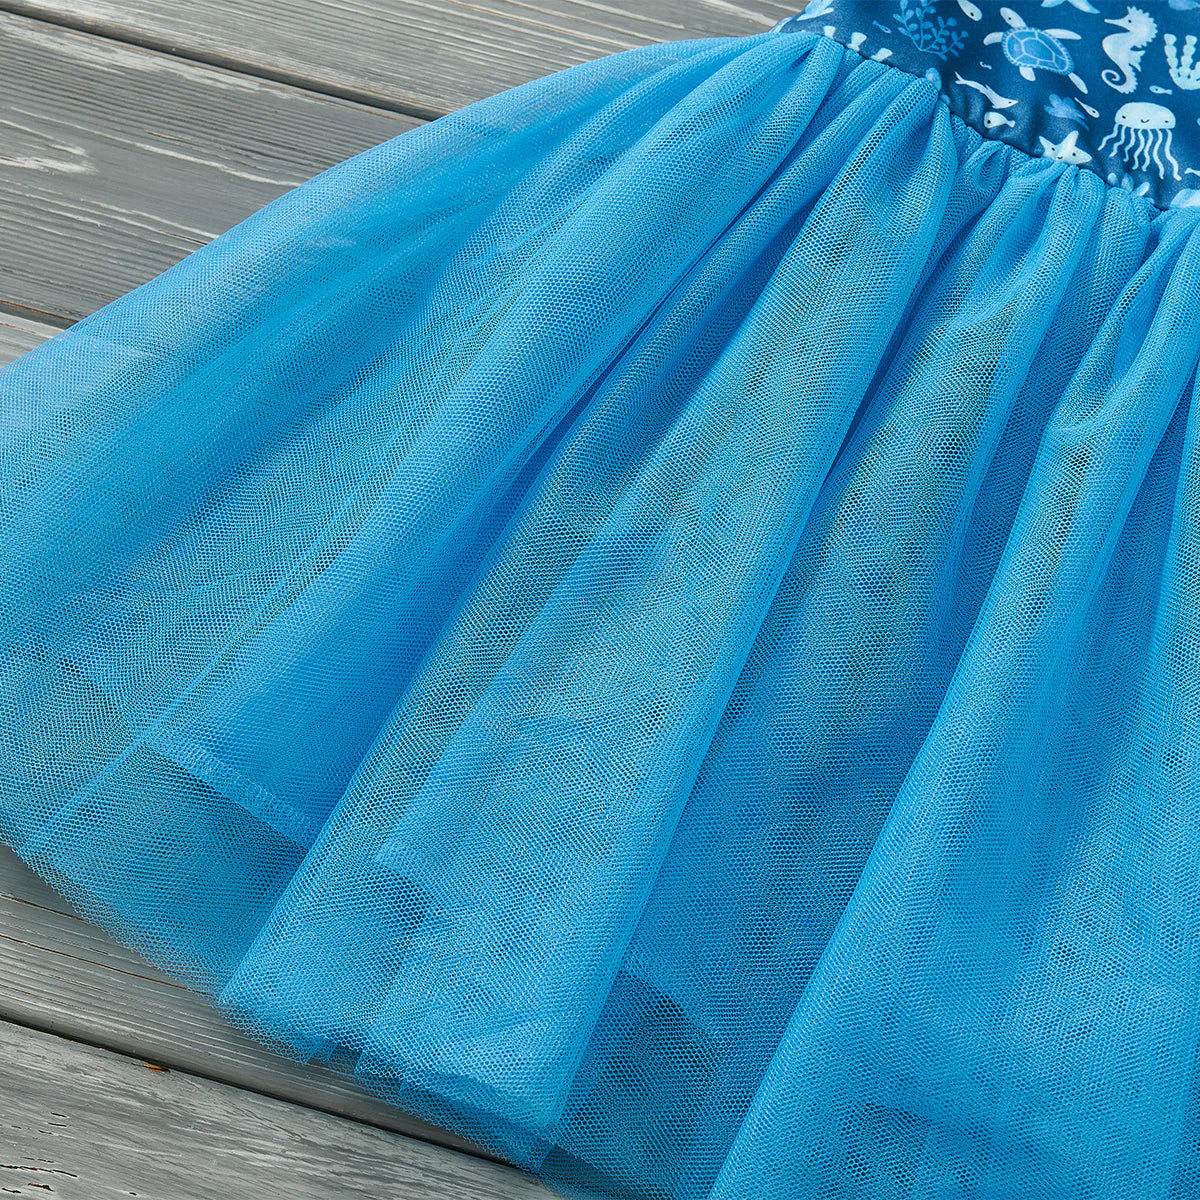 (Preorder) Under the Sea Tulle by Pete + Lucy